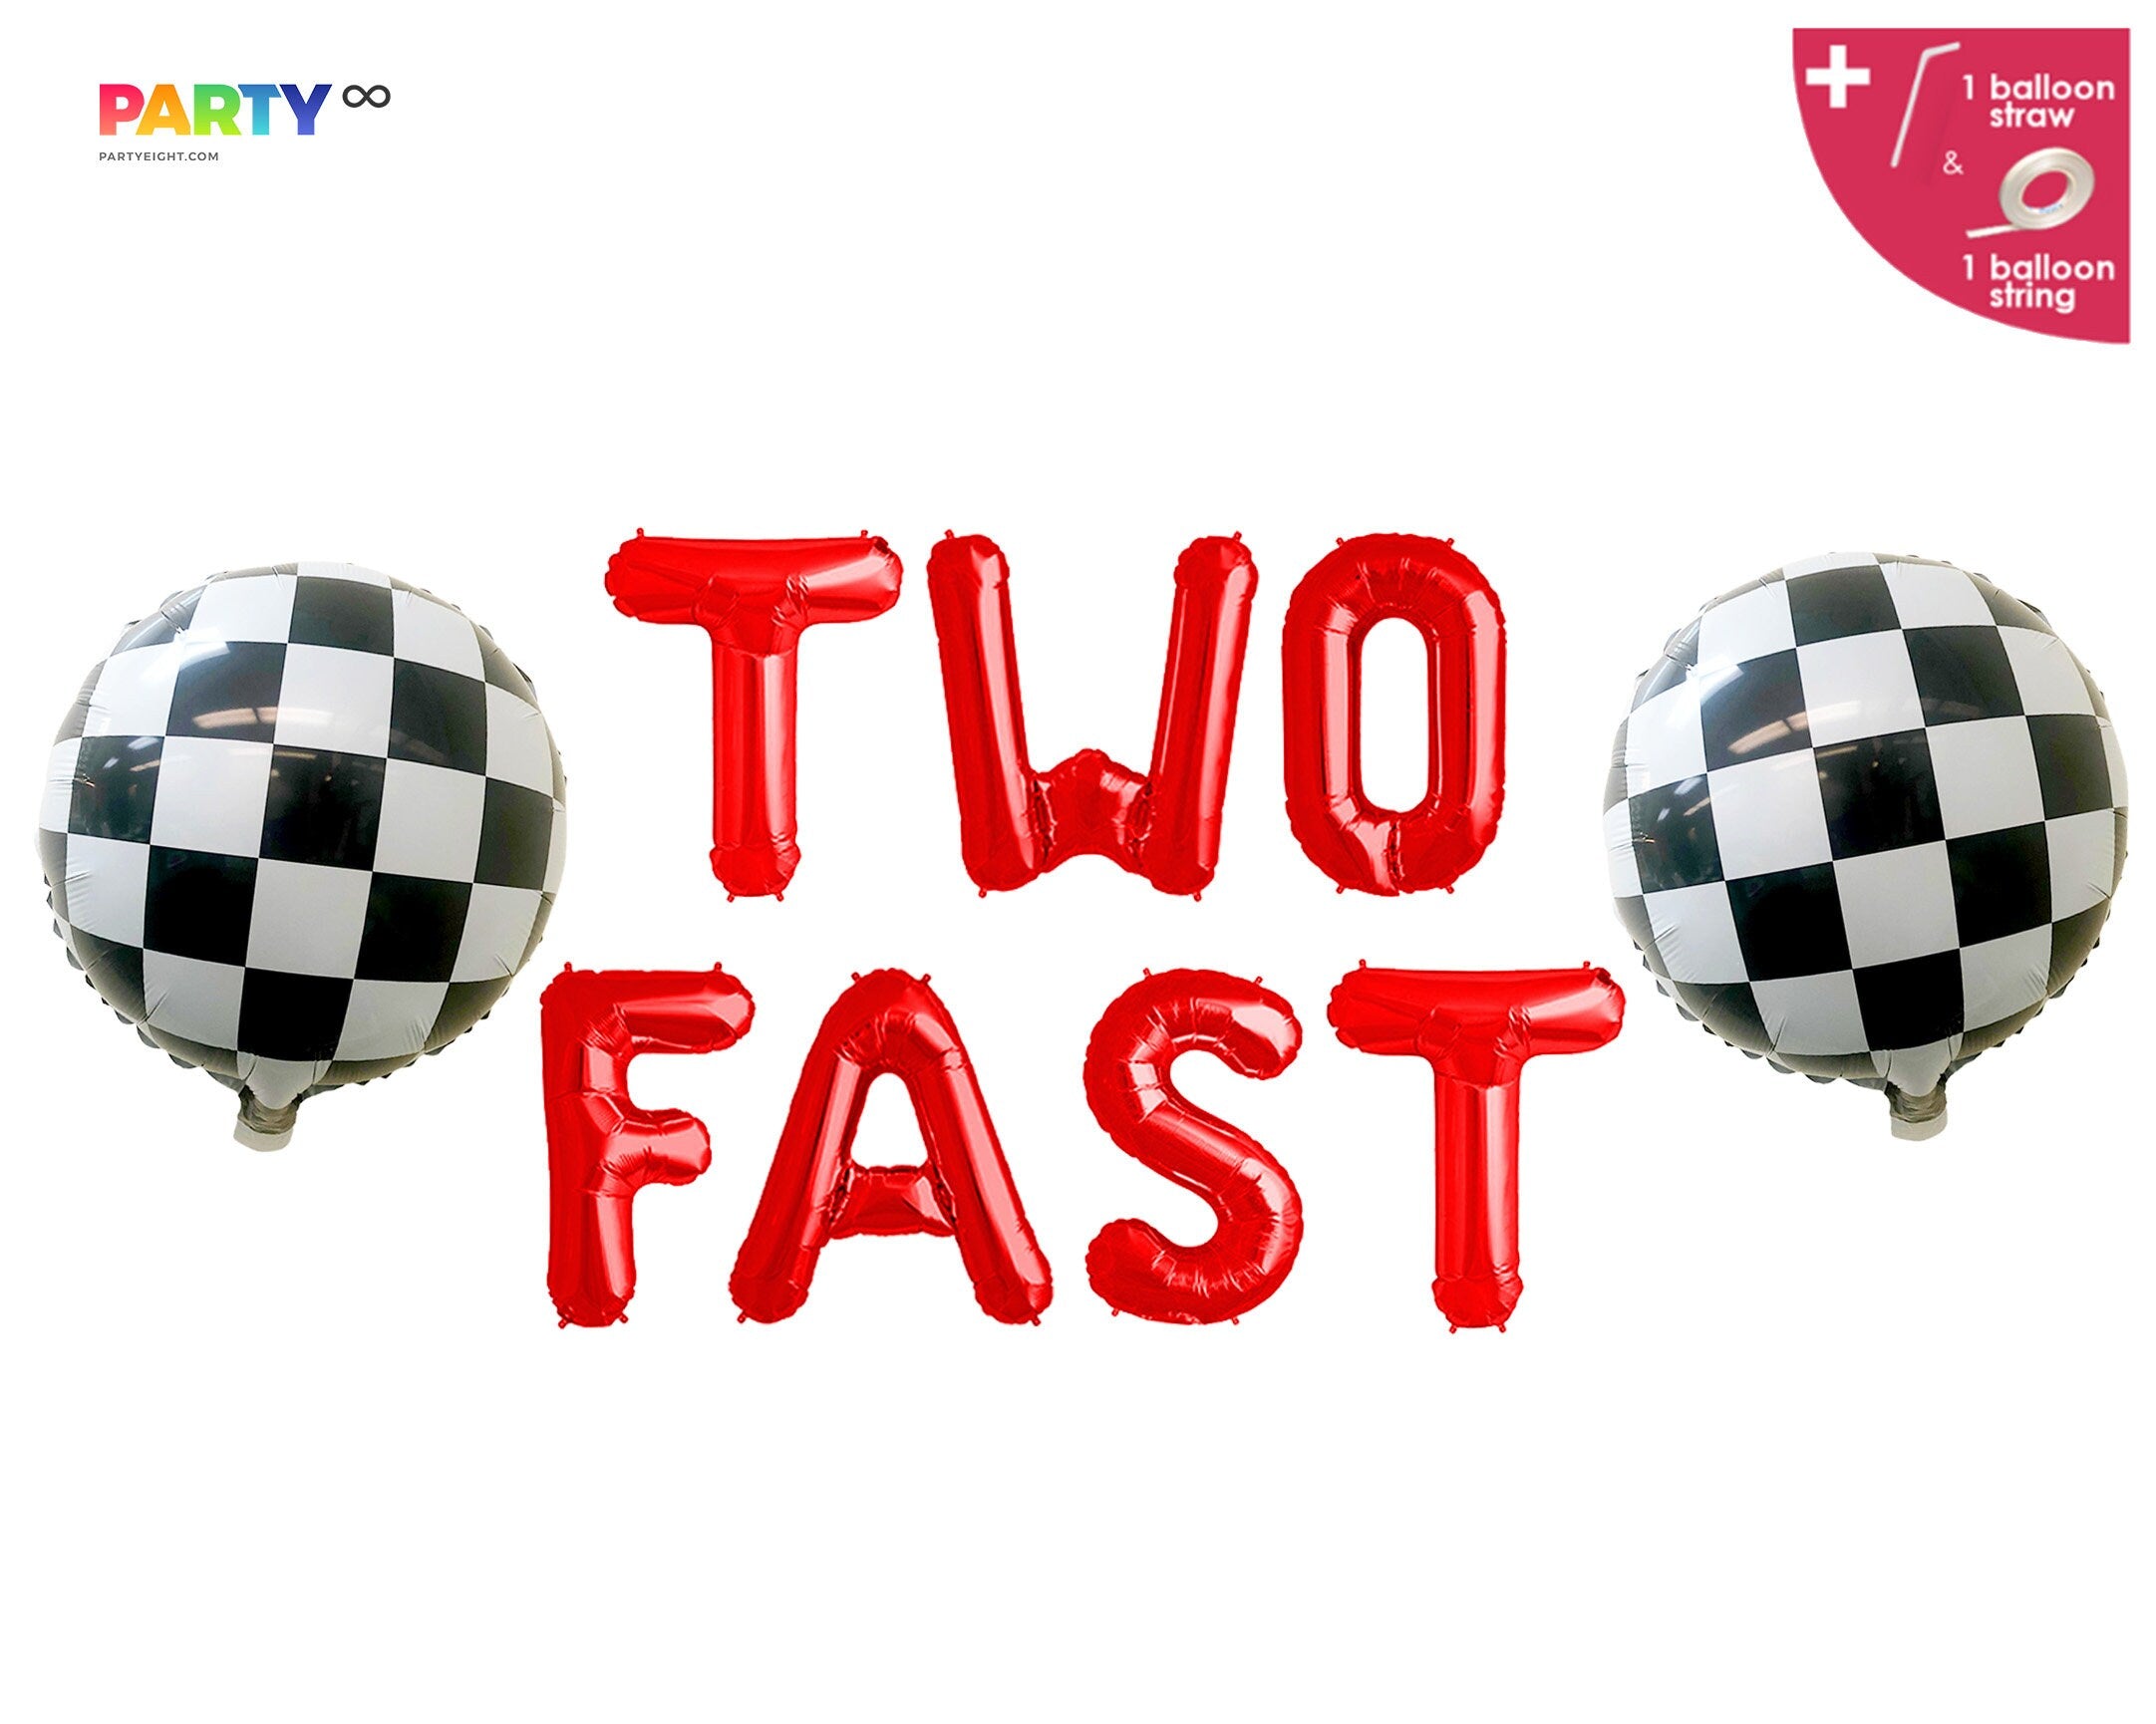 Two Fast 2nd Racing Car themed F1 theme Birthday Party Decoration Balloon Banner | 2nd Two Fast Birthday Party | Race Car Party Decor